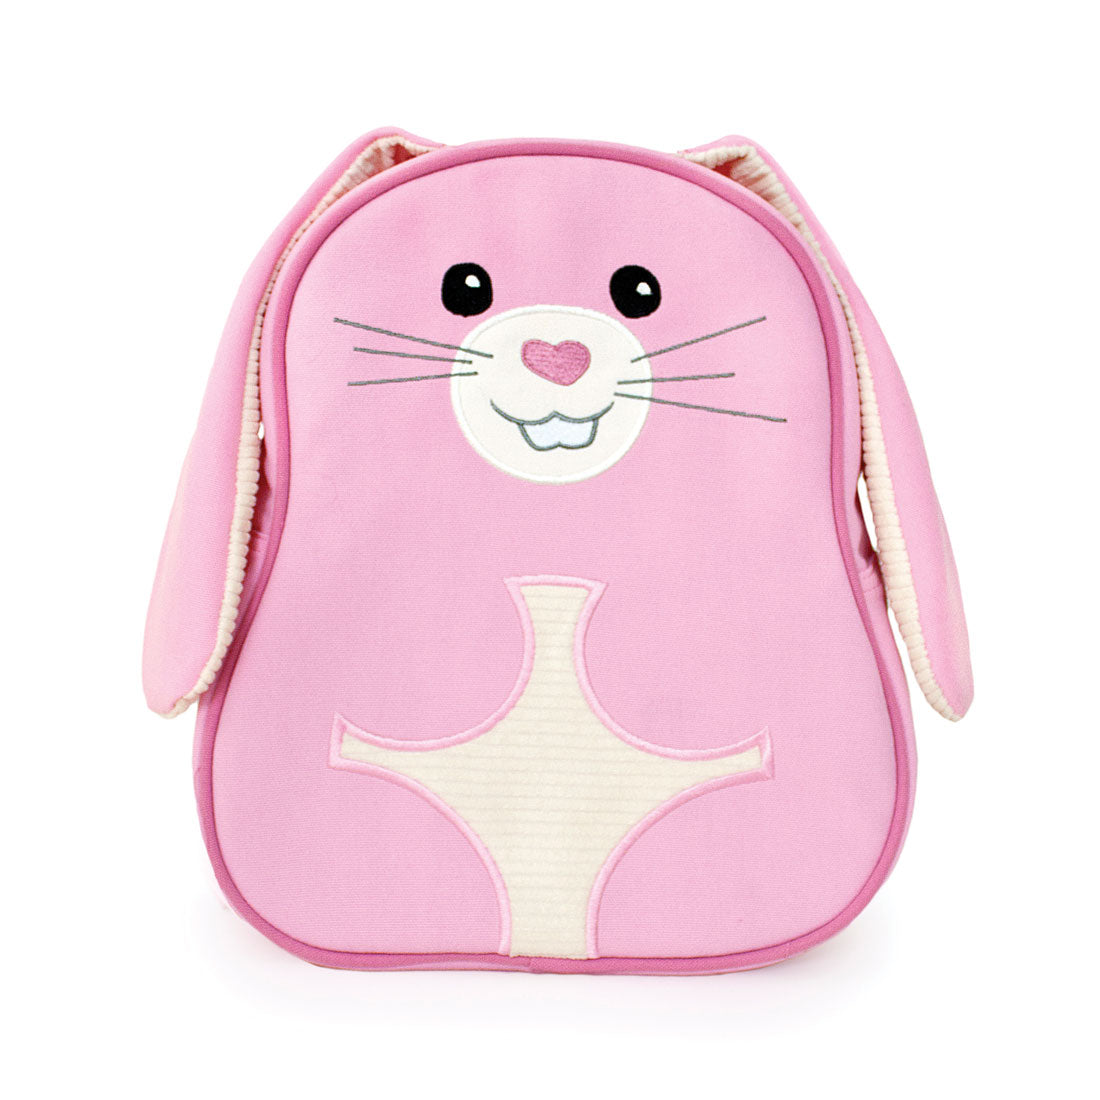 Recycled Fabric Backpack - Bunny